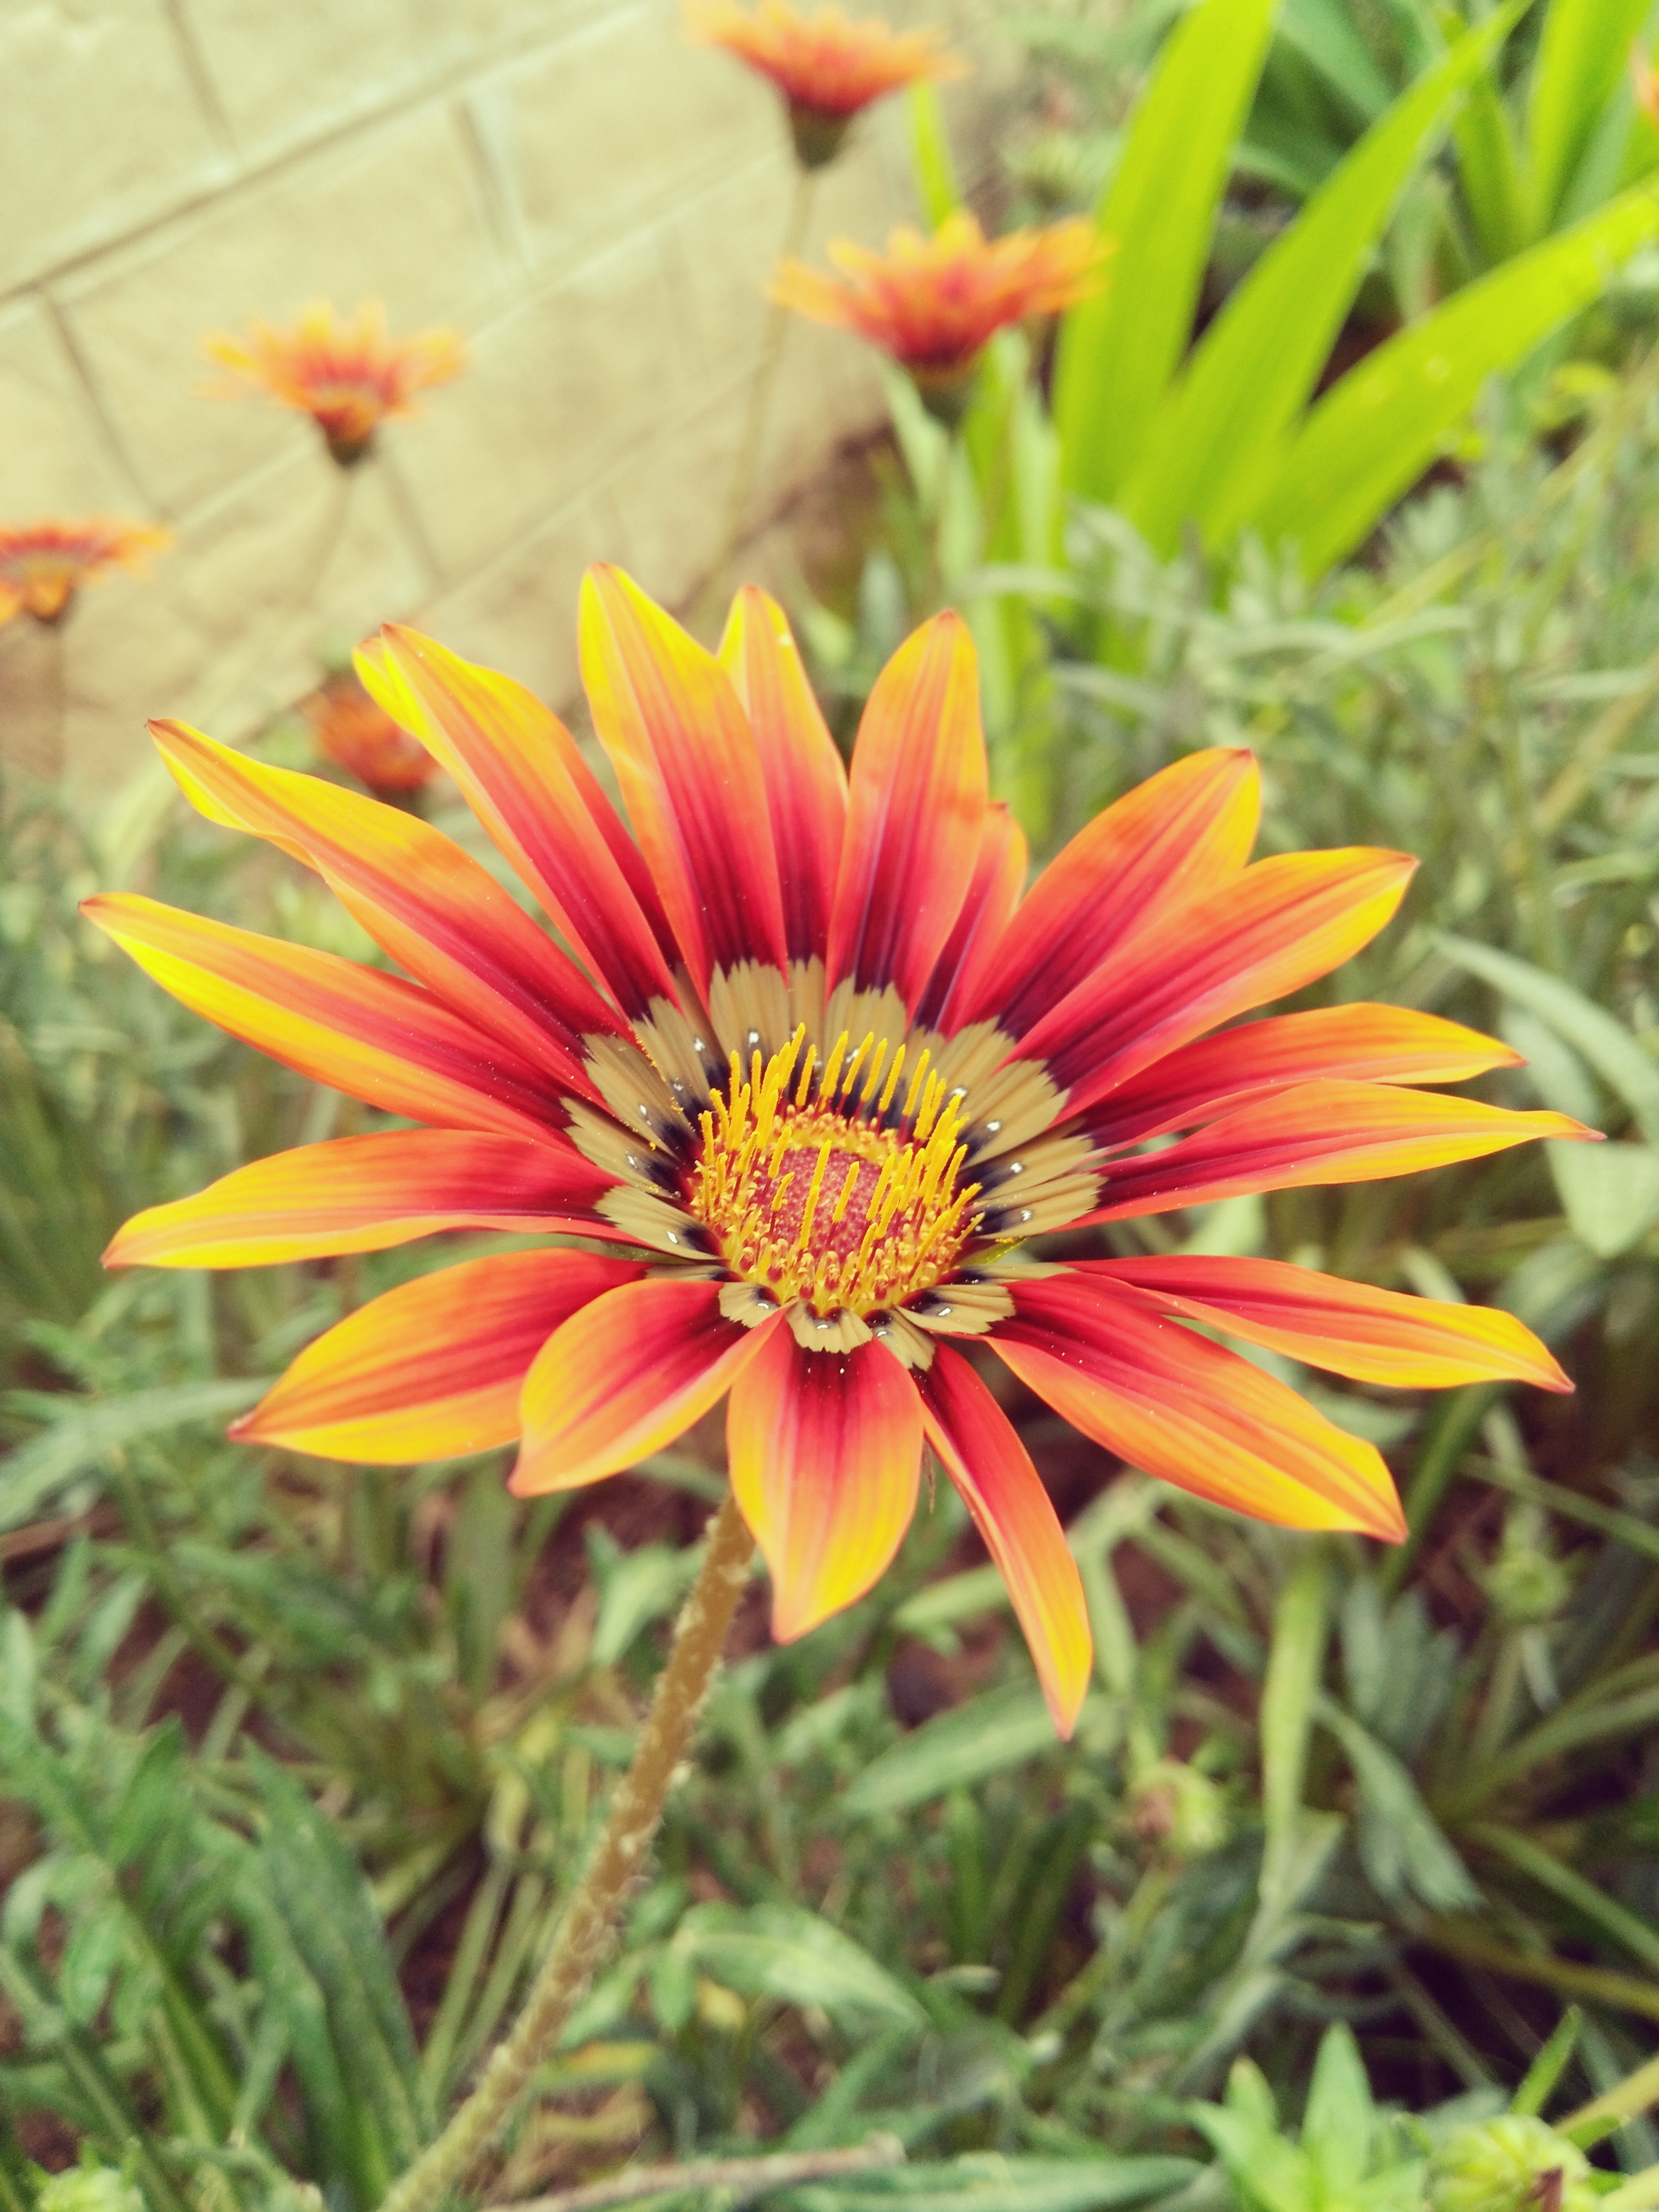 File:A fresh and healthy flower with a morning beauty.jpg ...